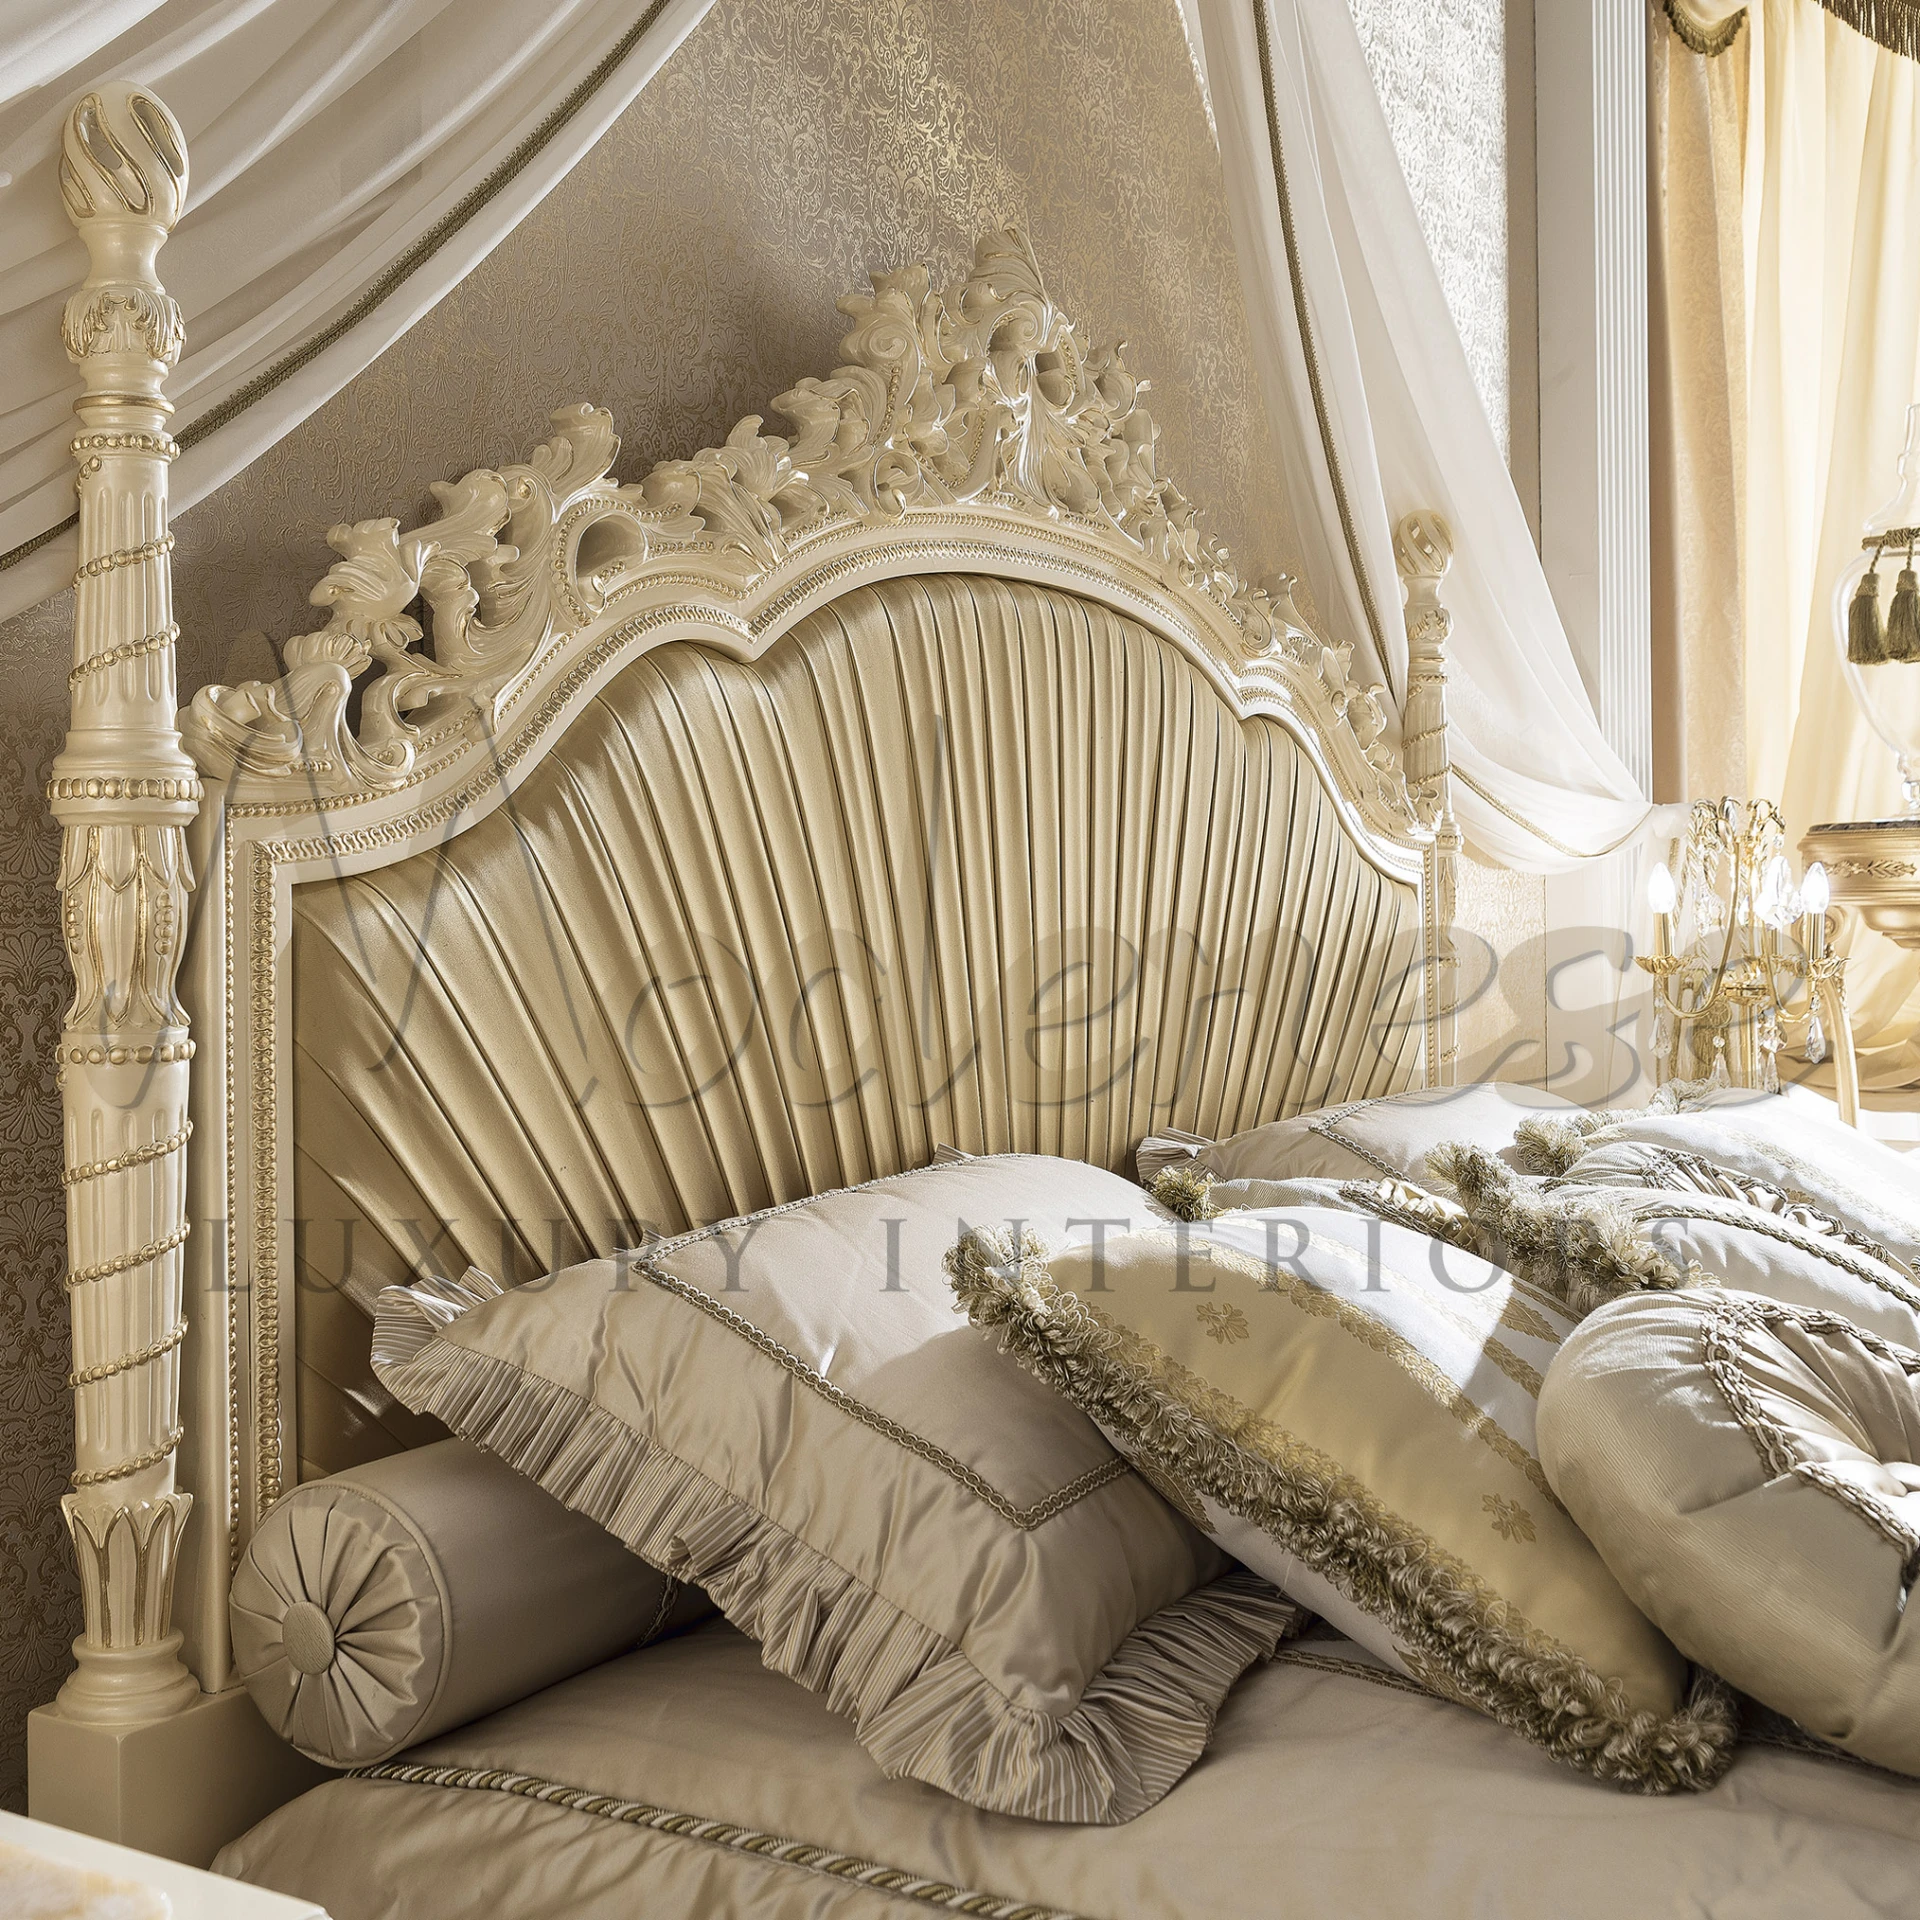 A close-up of an opulent cream-colored bed with a detailed, sculpted headboard featuring intricate carvings and fluted bedposts. Luxurious pillows and throws with tassels and embroidery detail.